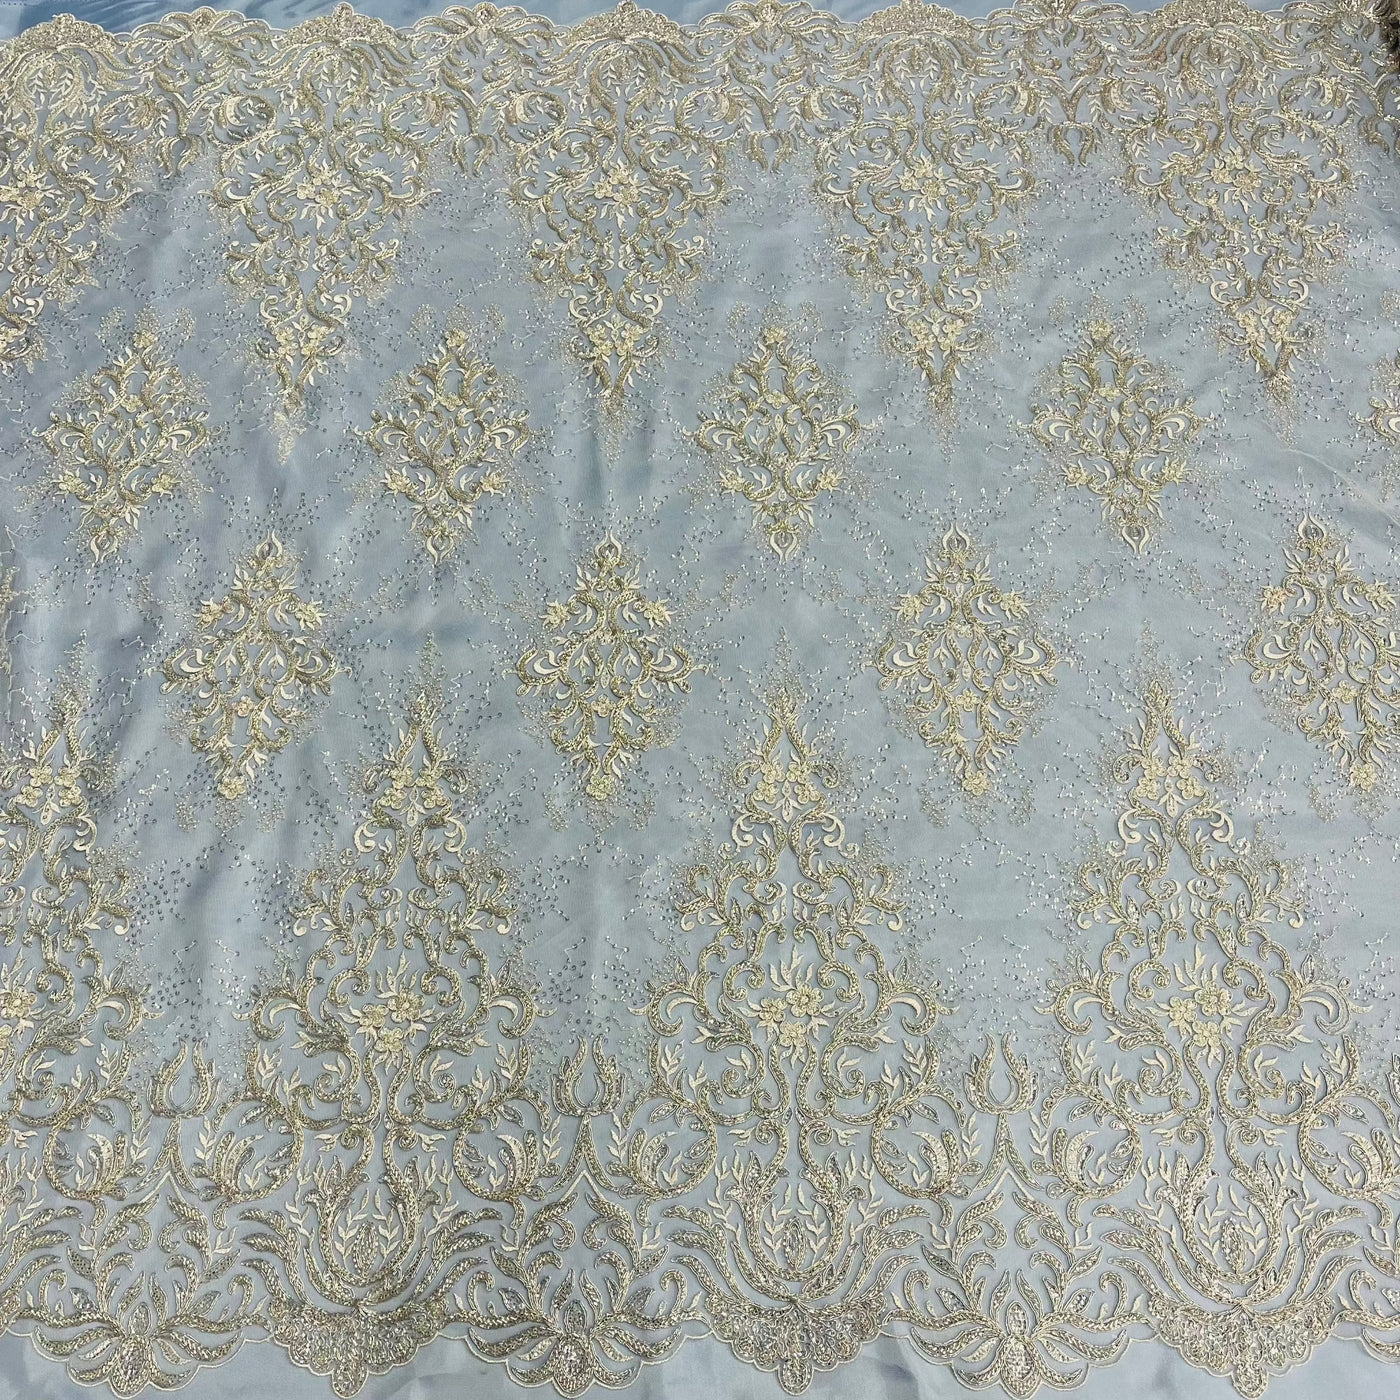 Beaded & Corded Bridal Lace Fabric Embroidered on 100% Polyester Net Mesh | Lace USA - GD-12266 Silver